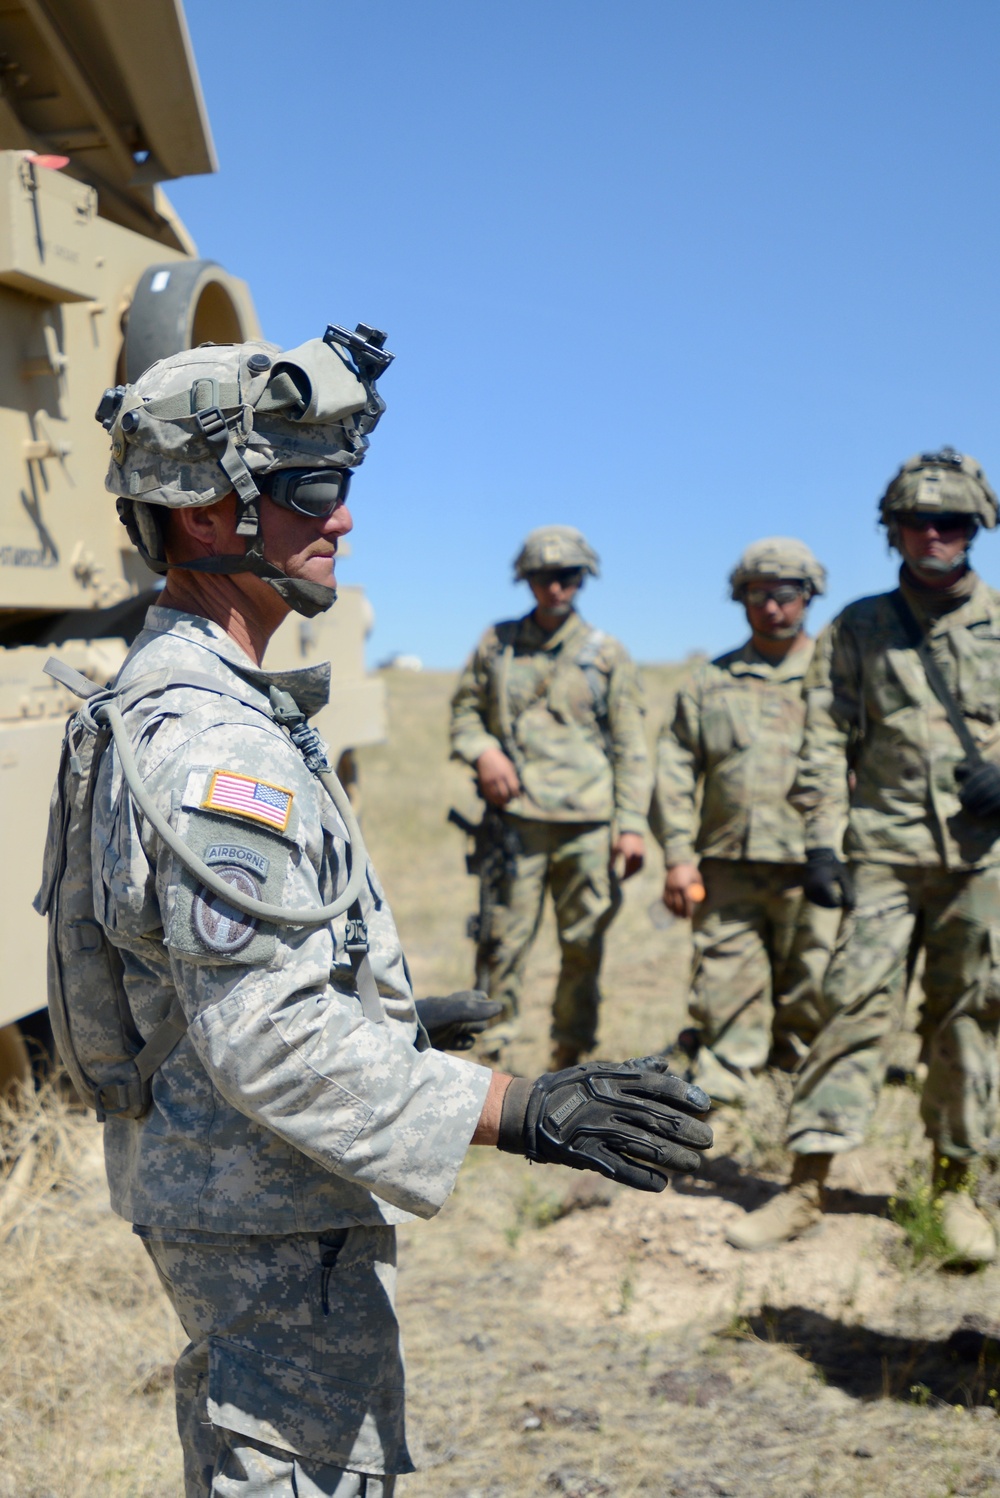 IDARNG and Army Reserve engineers train, fire MICLICs together